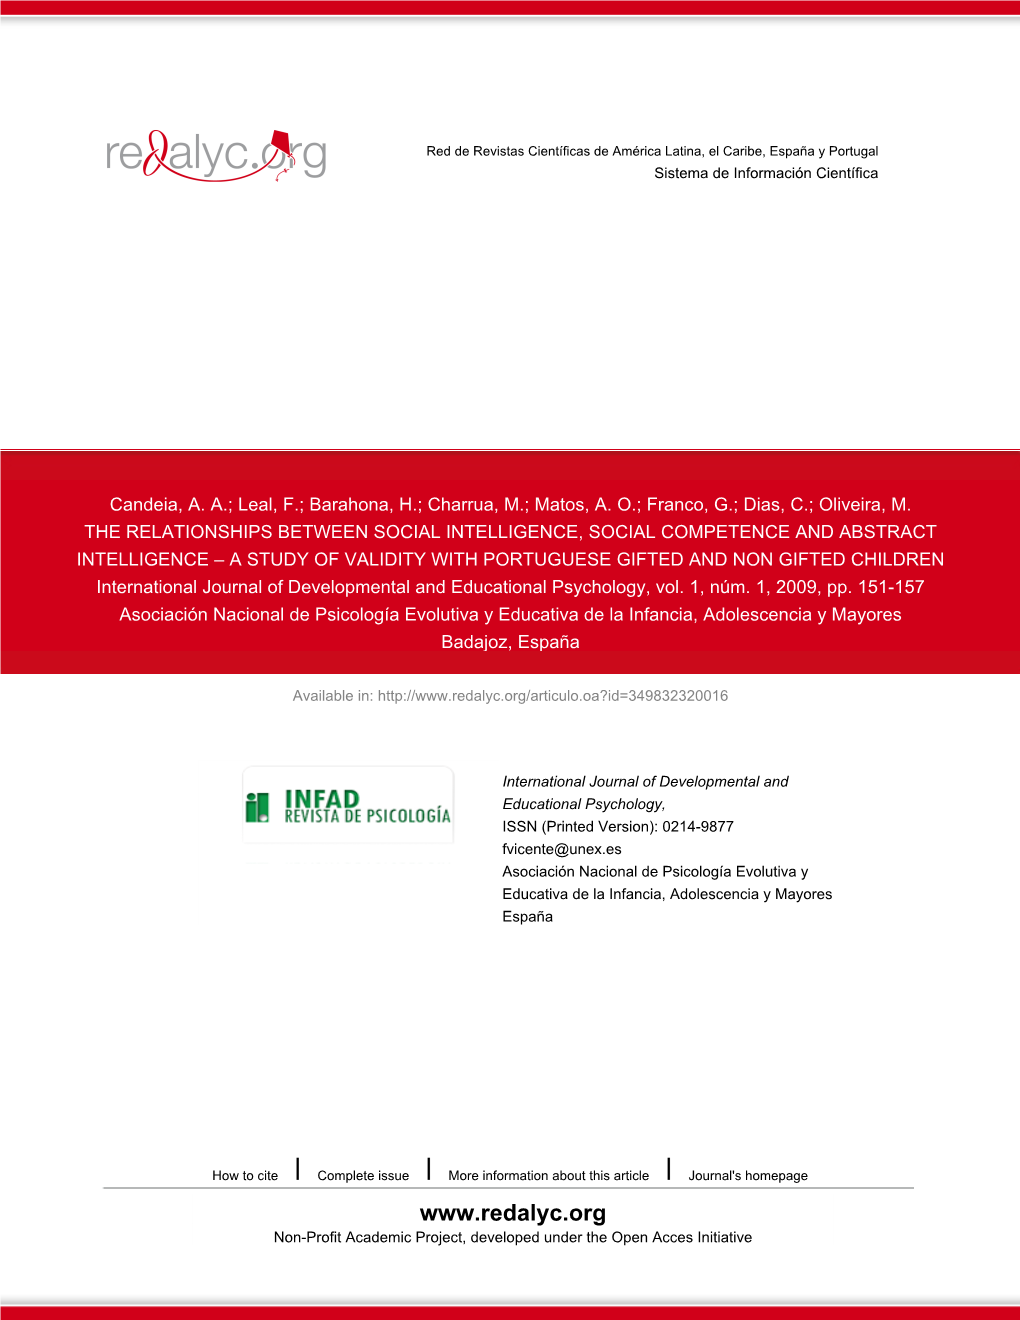 A STUDY of VALIDITY with PORTUGUESE GIFTED and NON GIFTED CHILDREN International Journal of Developmental and Educational Psychology, Vol